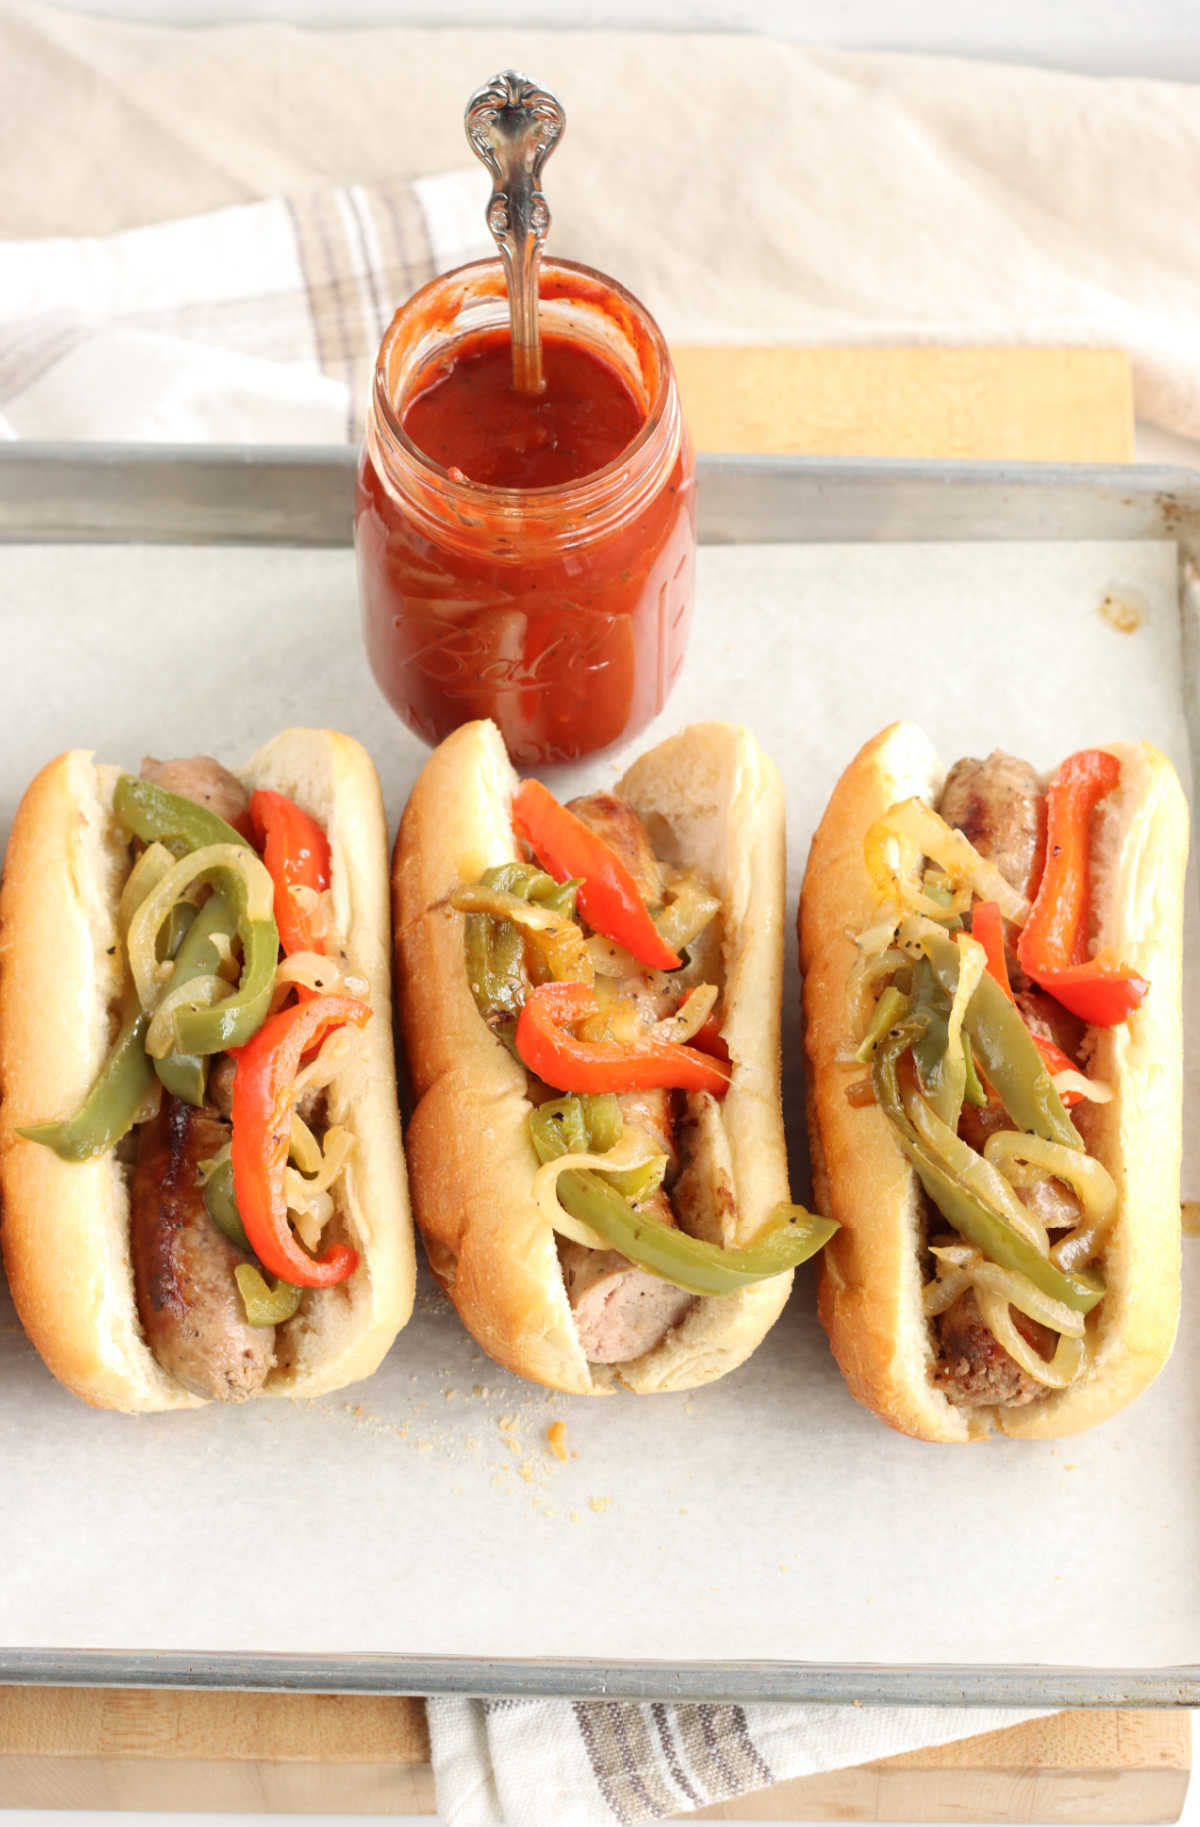 Sausage and peppers on Hoagie rolls on sheet pan with parchment paper, jar of sauce with spoon.